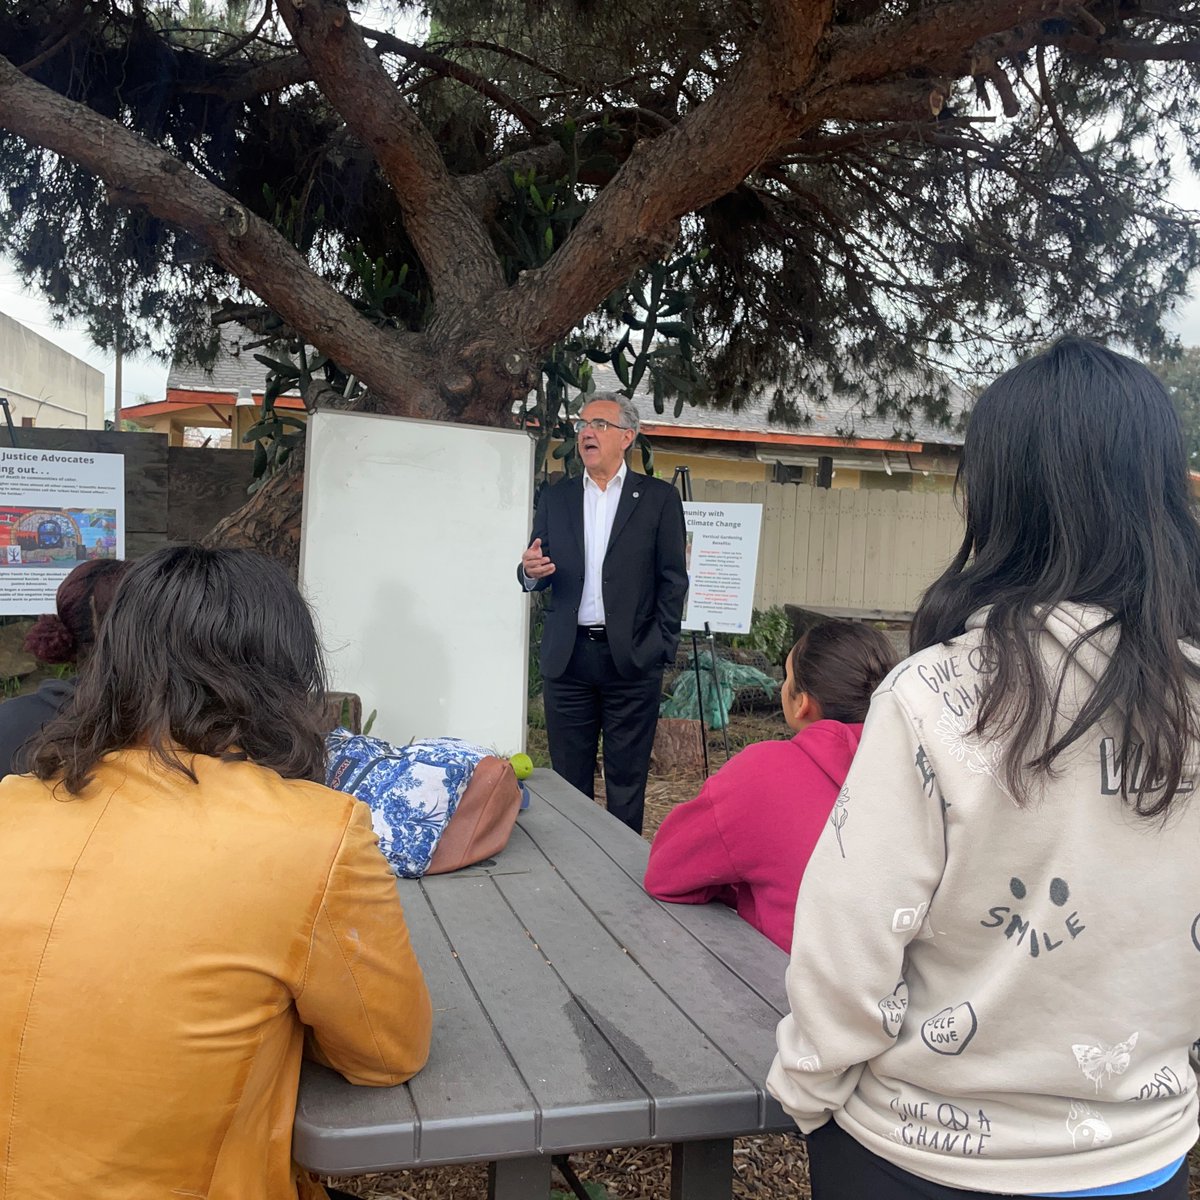 I connected with bright students at the Global Action Research Center - Ocean View Growing Grounds. More than a garden, it nurtures Young Environmental Justice Advocates. Together, we will shape a sustainable future, uplifting young leaders. #ClimateActionPlan